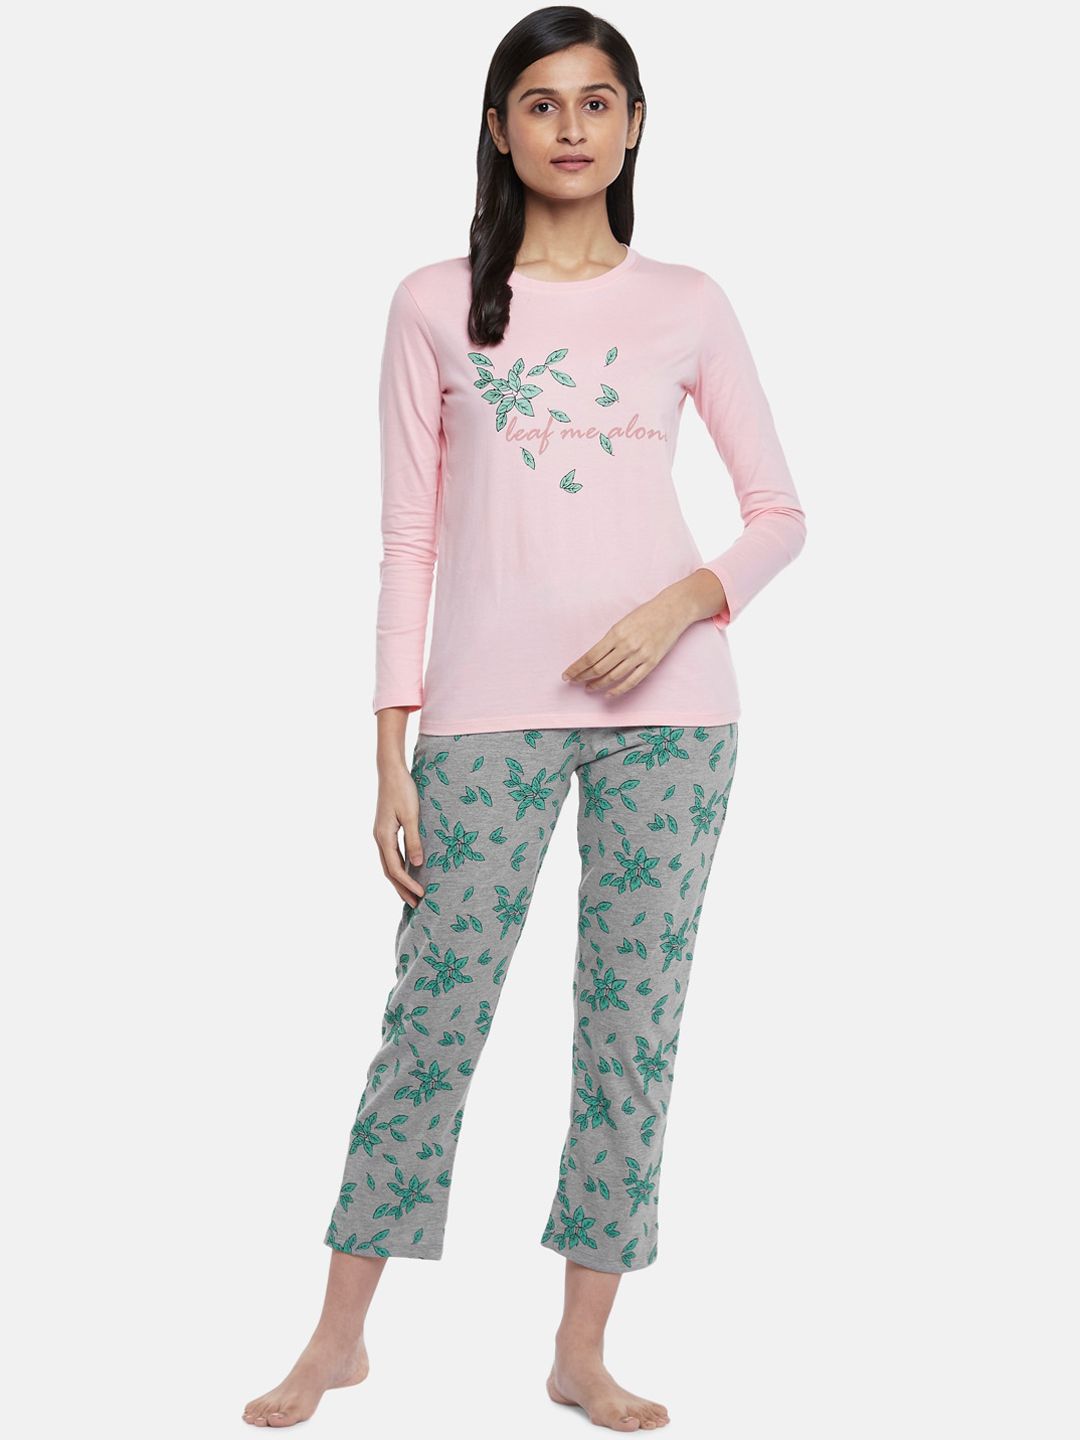 Dreamz by Pantaloons Women Pink & Grey Printed Night suit Price in India